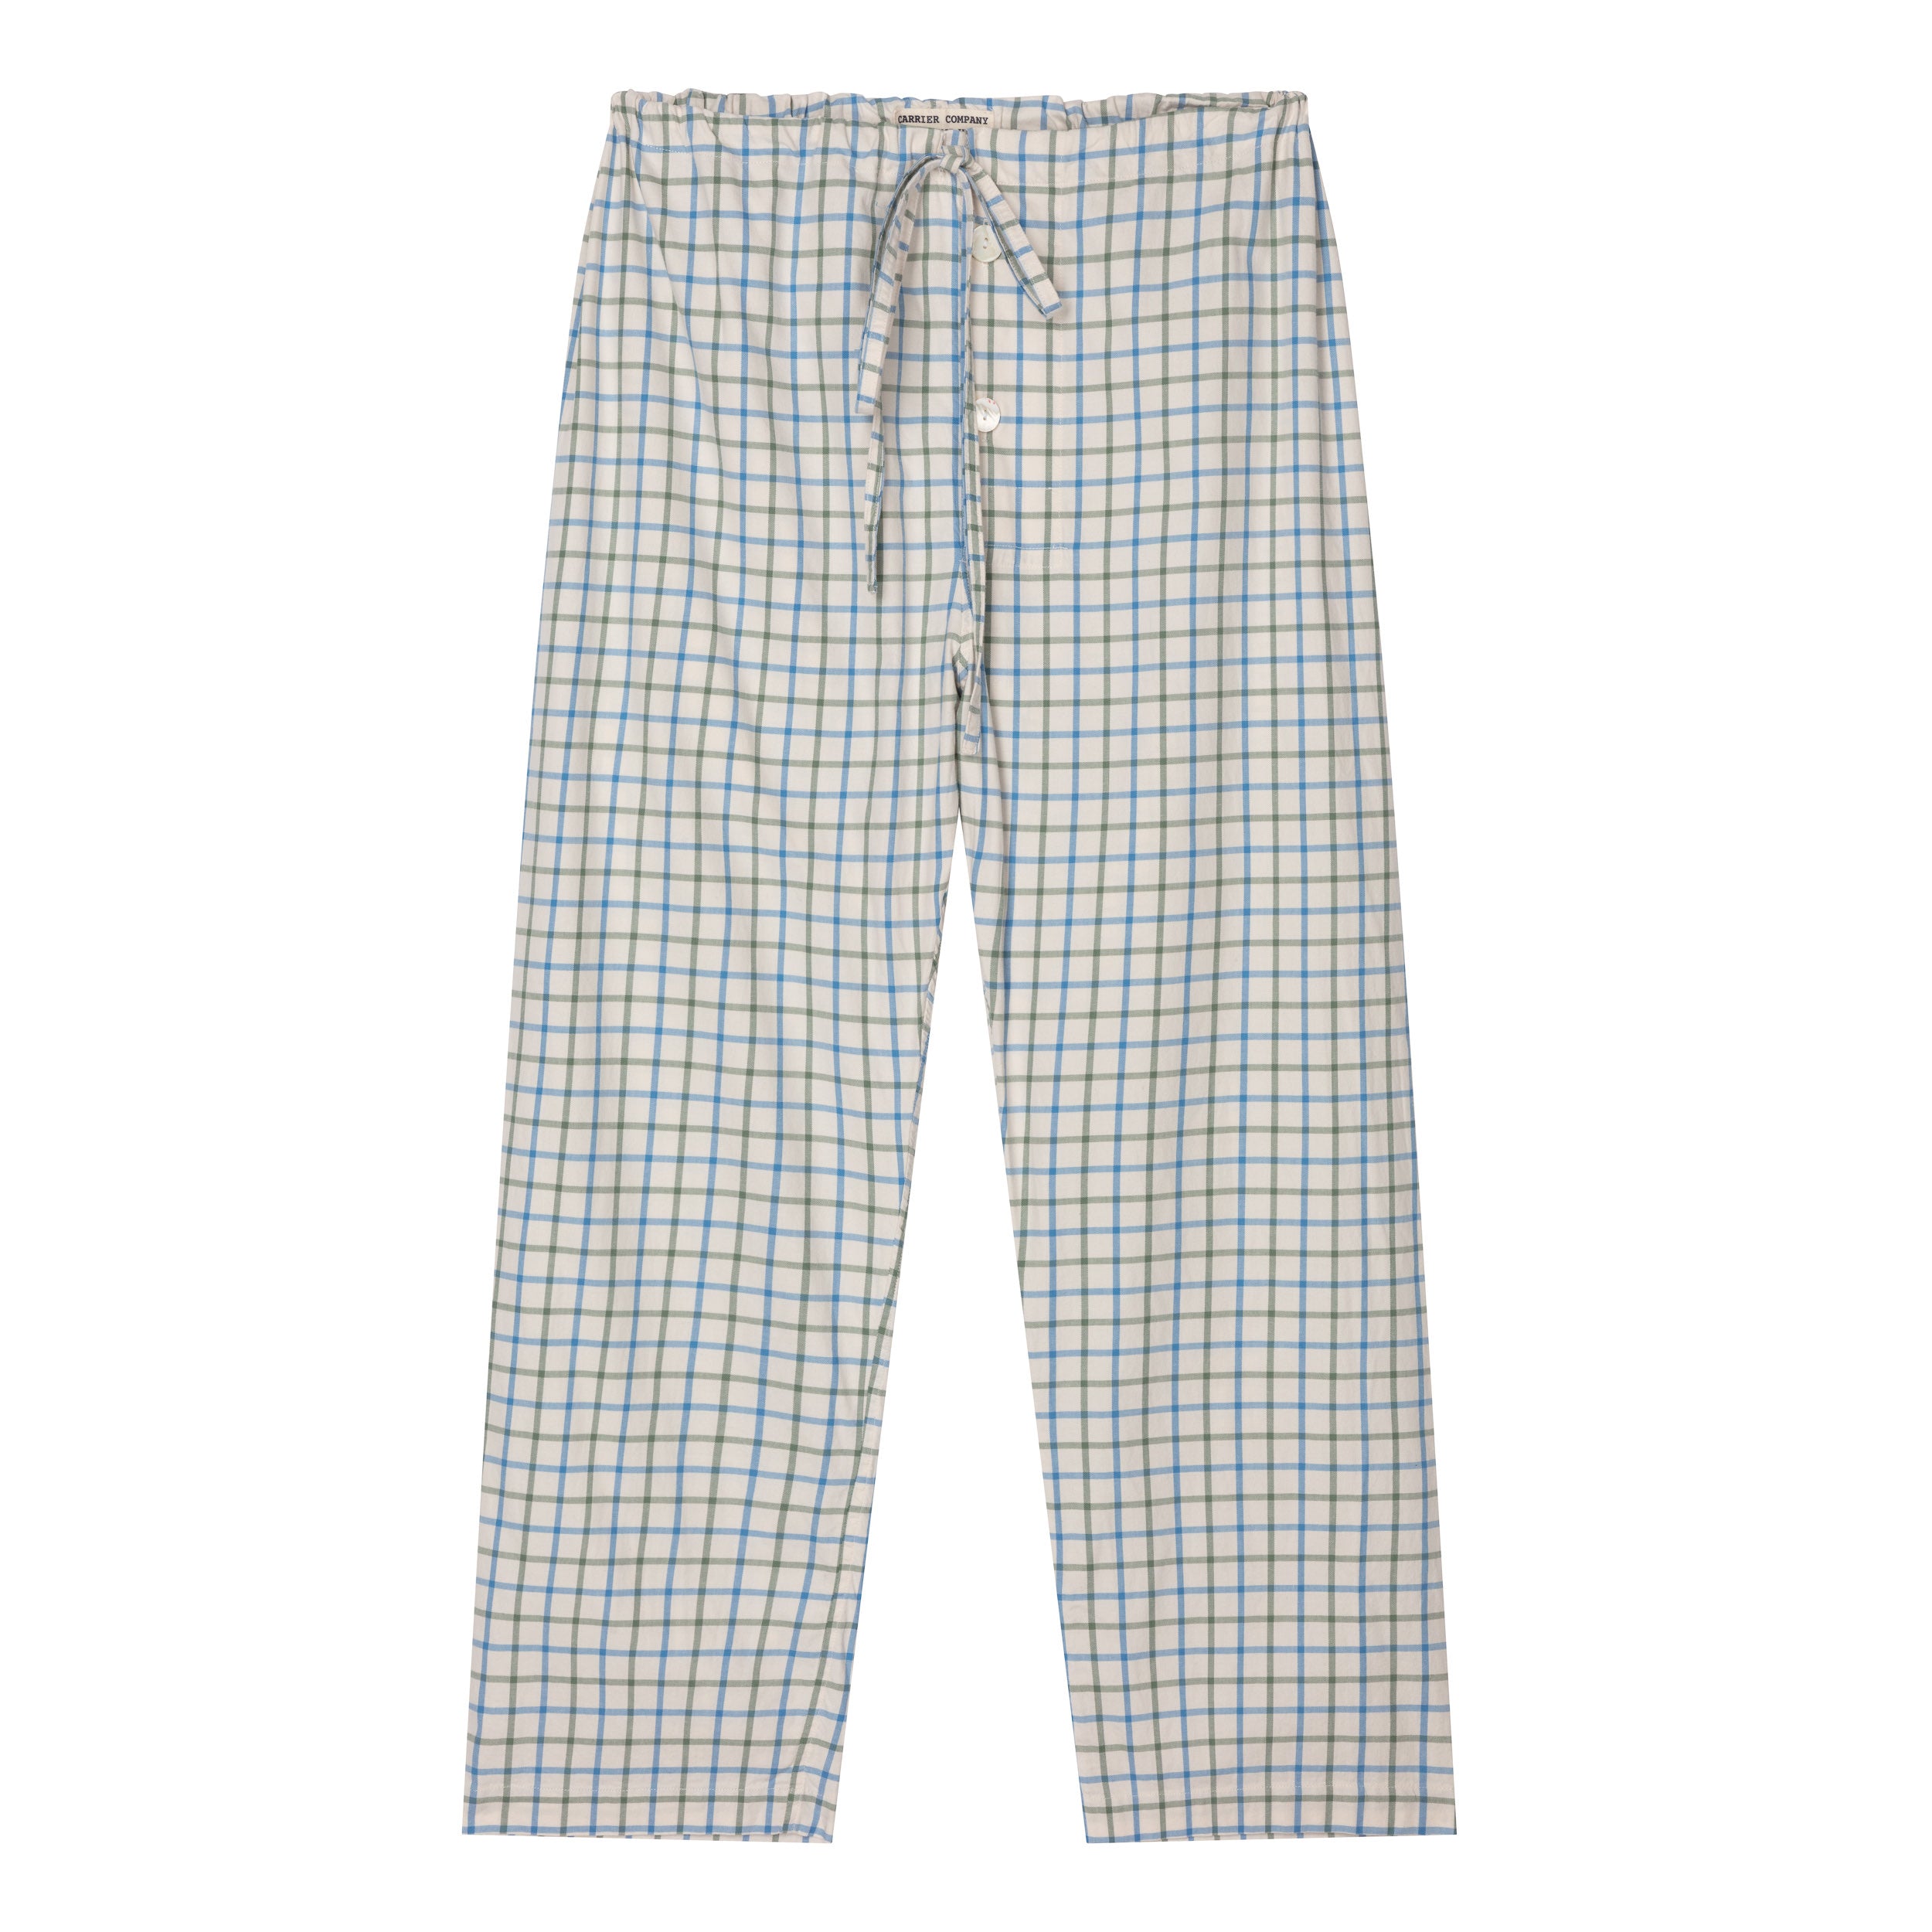 Carrier Company superior Cotton Pyjama In Blue & Green Check